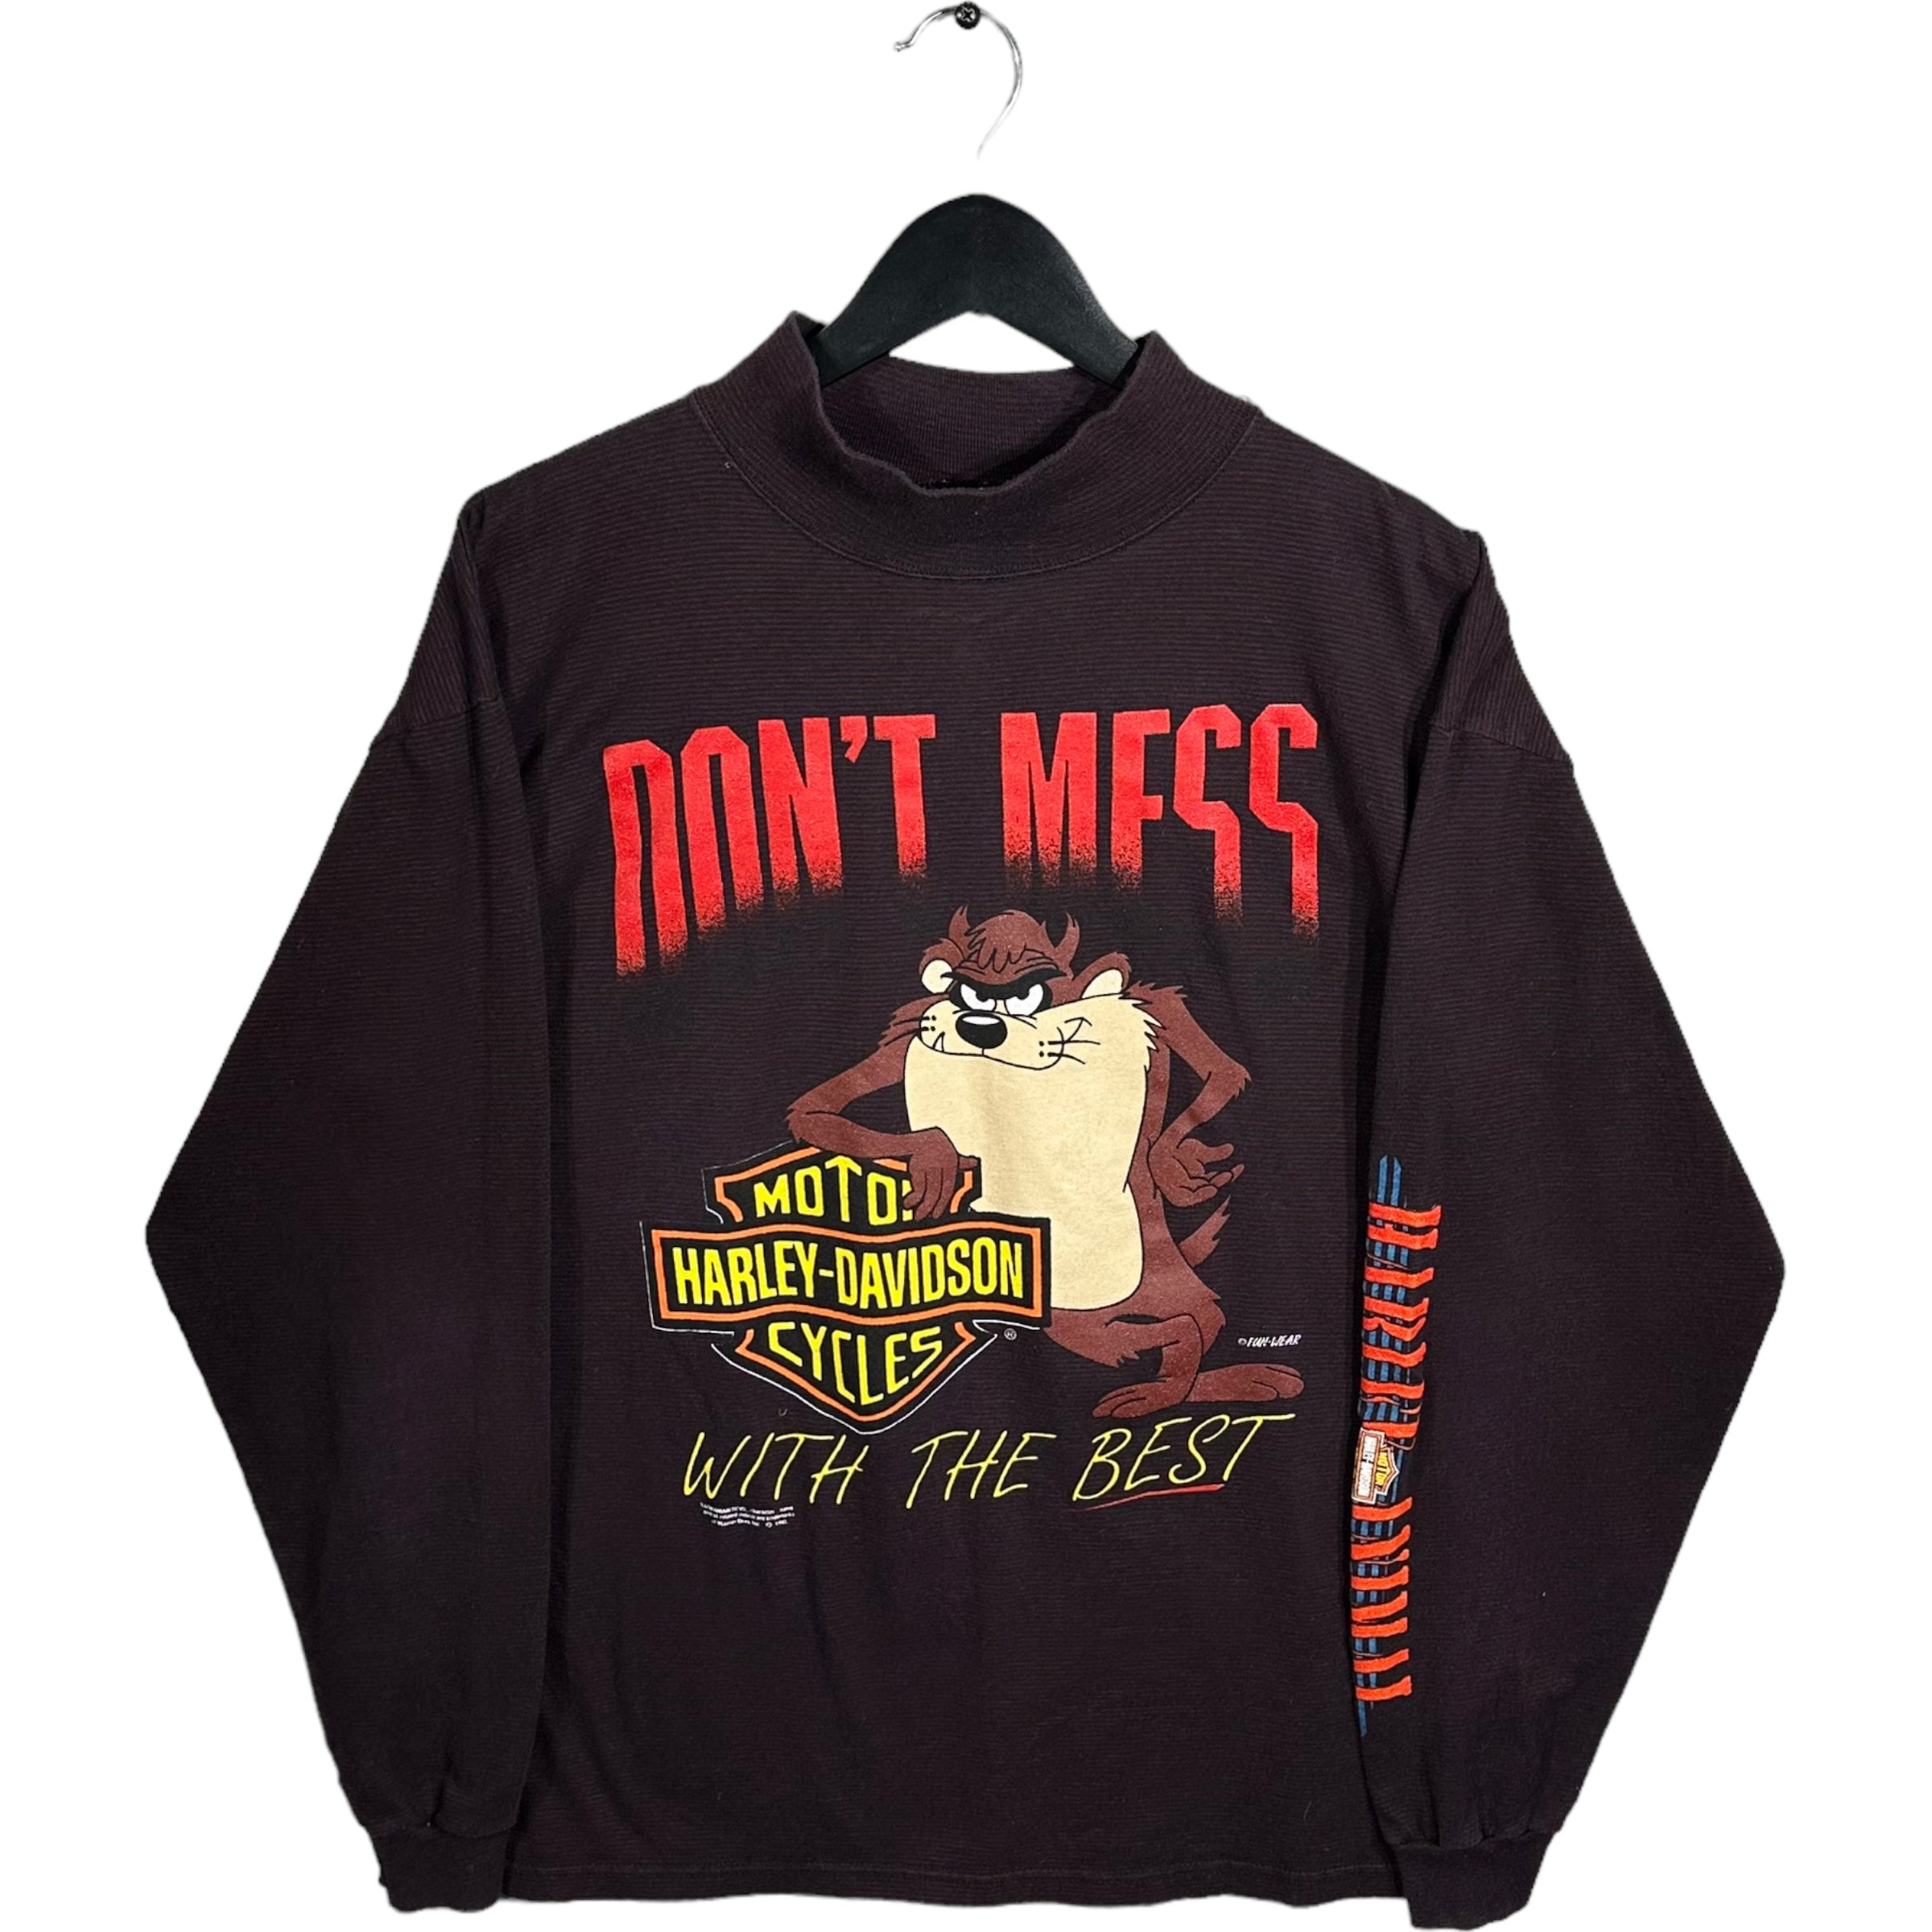 Vintage Harley Davidson Taz "Don't Mess With The Best" Long Sleeve